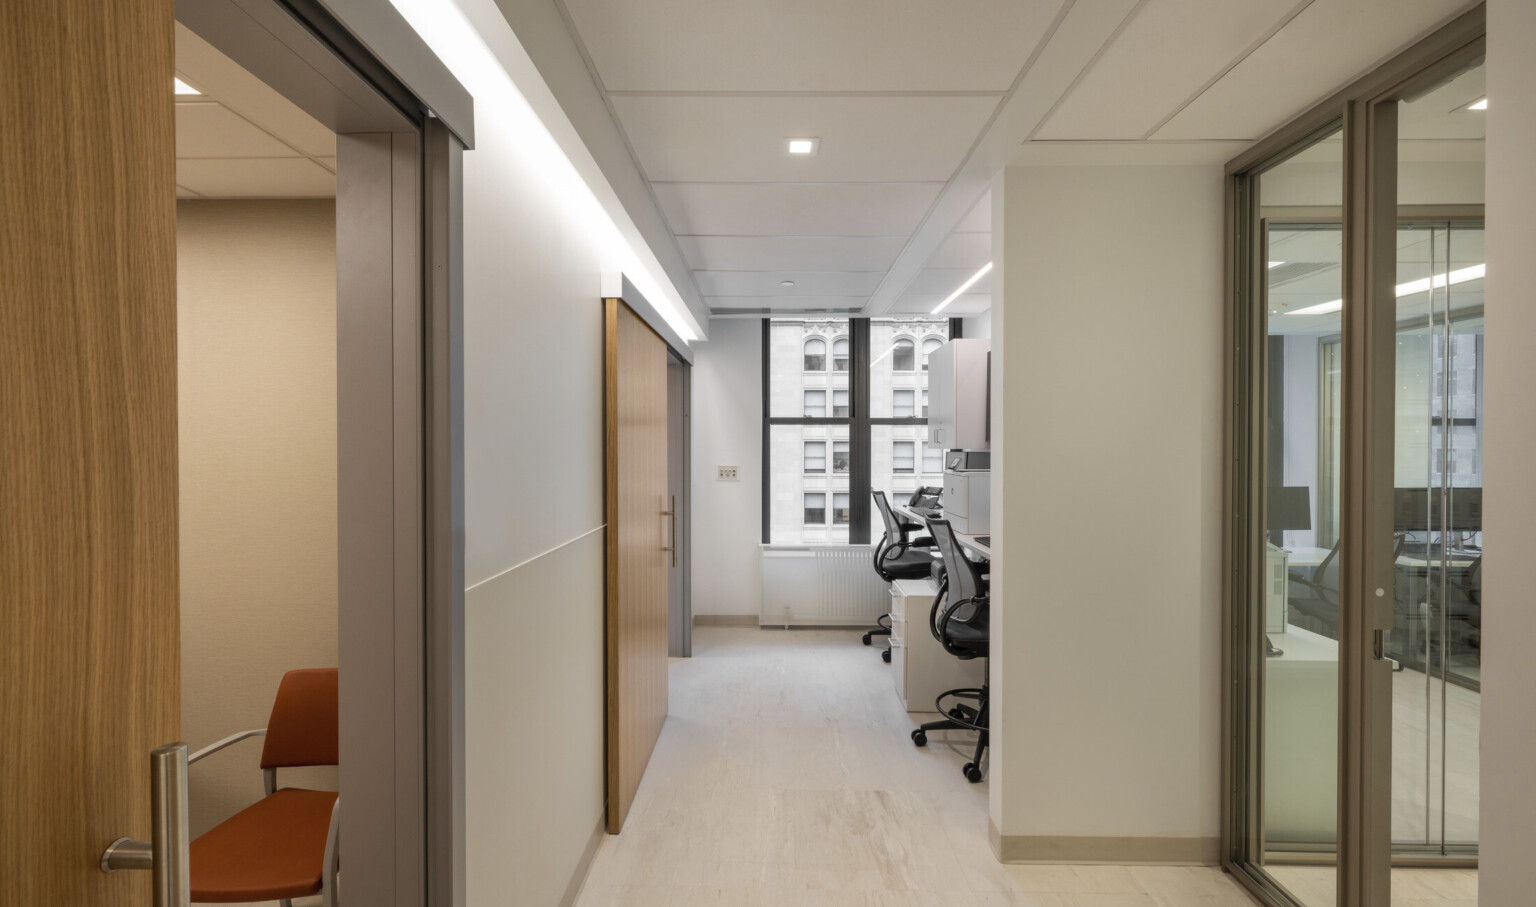 champagne–finished storefront with full-height glazing to allow light to penetrate in the corridors, a view toward the outside in public corridors, natural wood was employed as a wayfinding device to help patients find their way on their journey through the facility